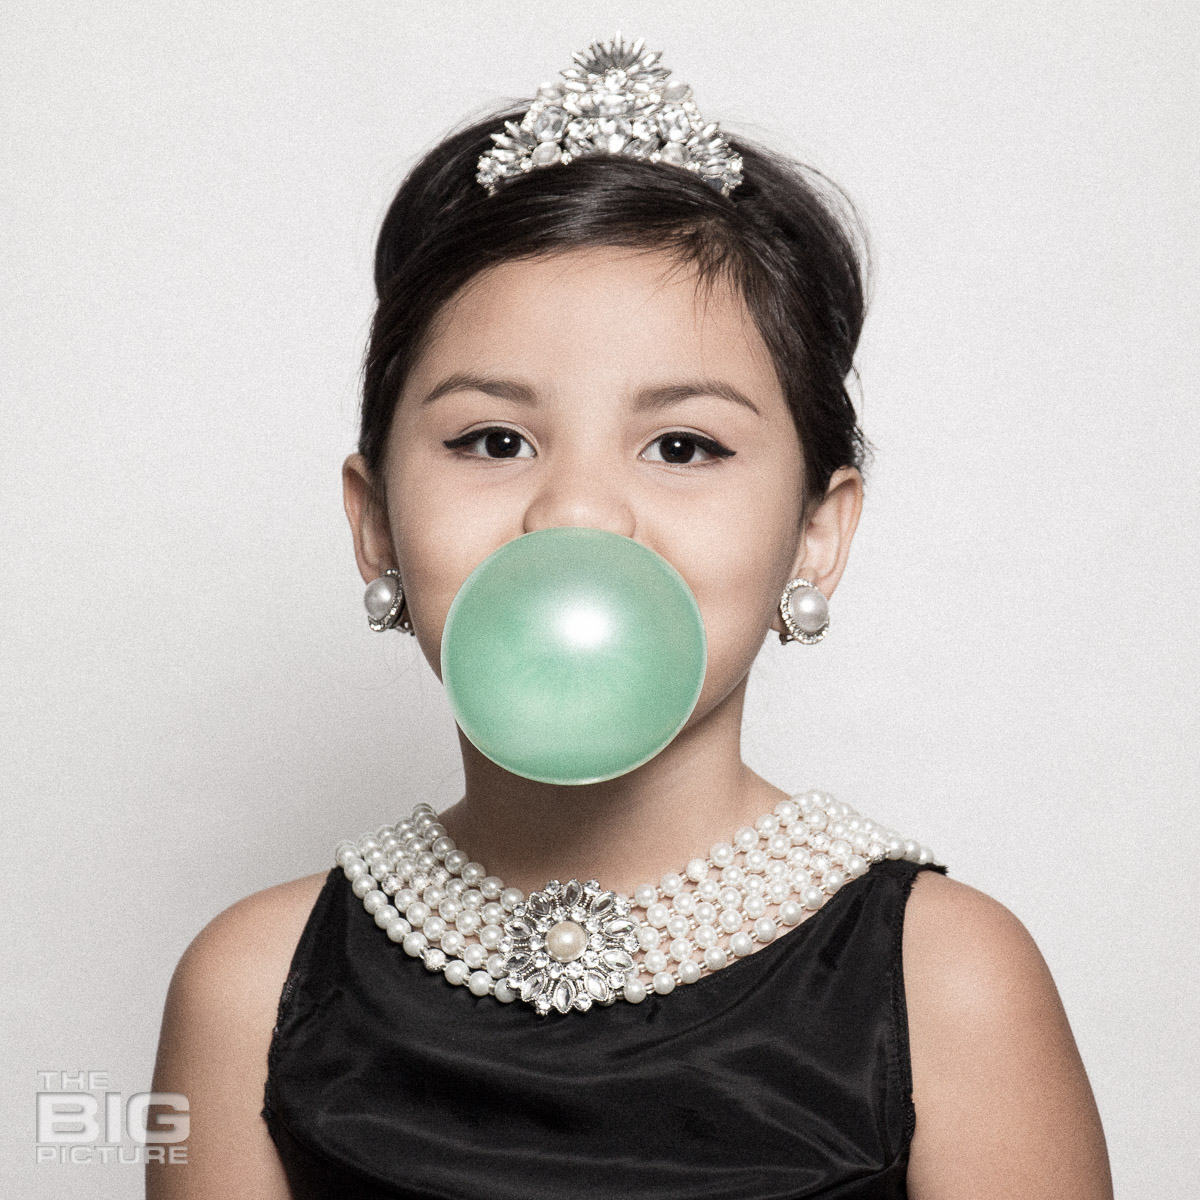 Ava blowing a bubble like Audrey Hepburn in a scene from breakfast at Tiffany's  - kids photography - children's photography